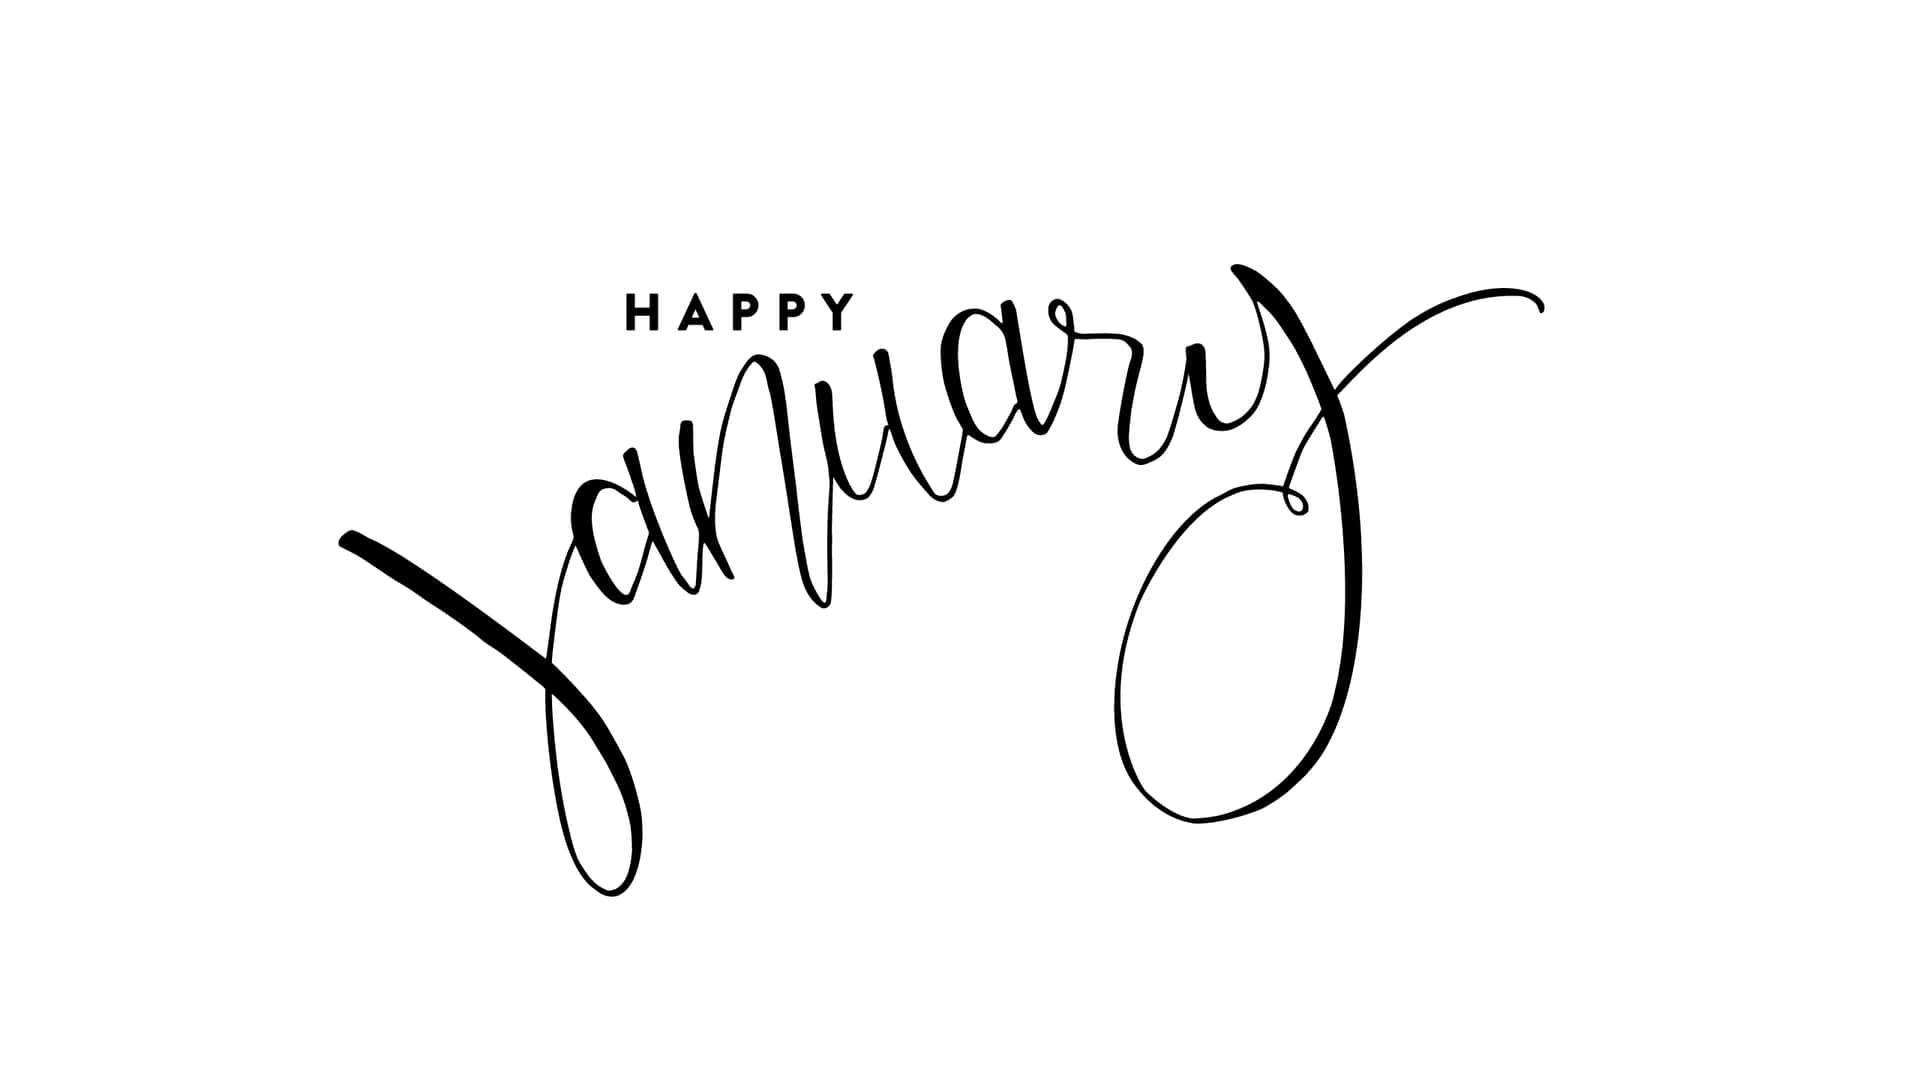 “Welcome to January - a New Year, A Fresh Start” Wallpaper